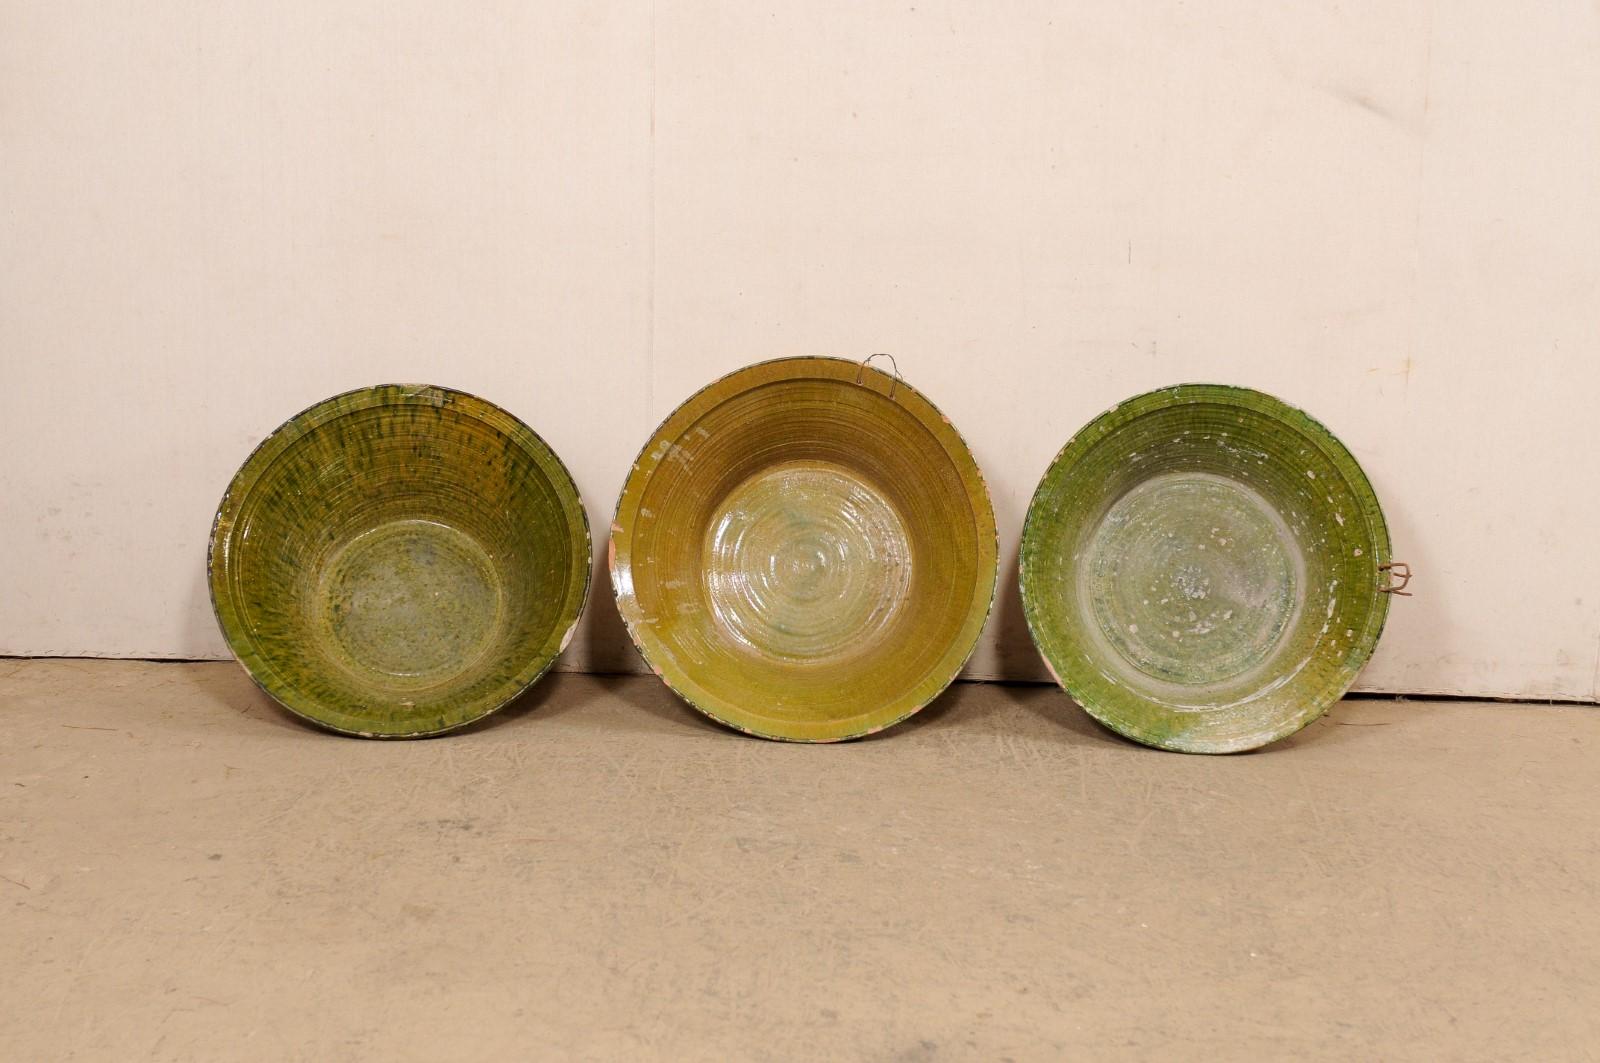 A Spanish set of three glazed terracotta bowls from the early 20th century. This collection of antique bowls from Spain are each round in shape, with widest part being at the top lip, and gradually tapering down and resting upon a flat base. There